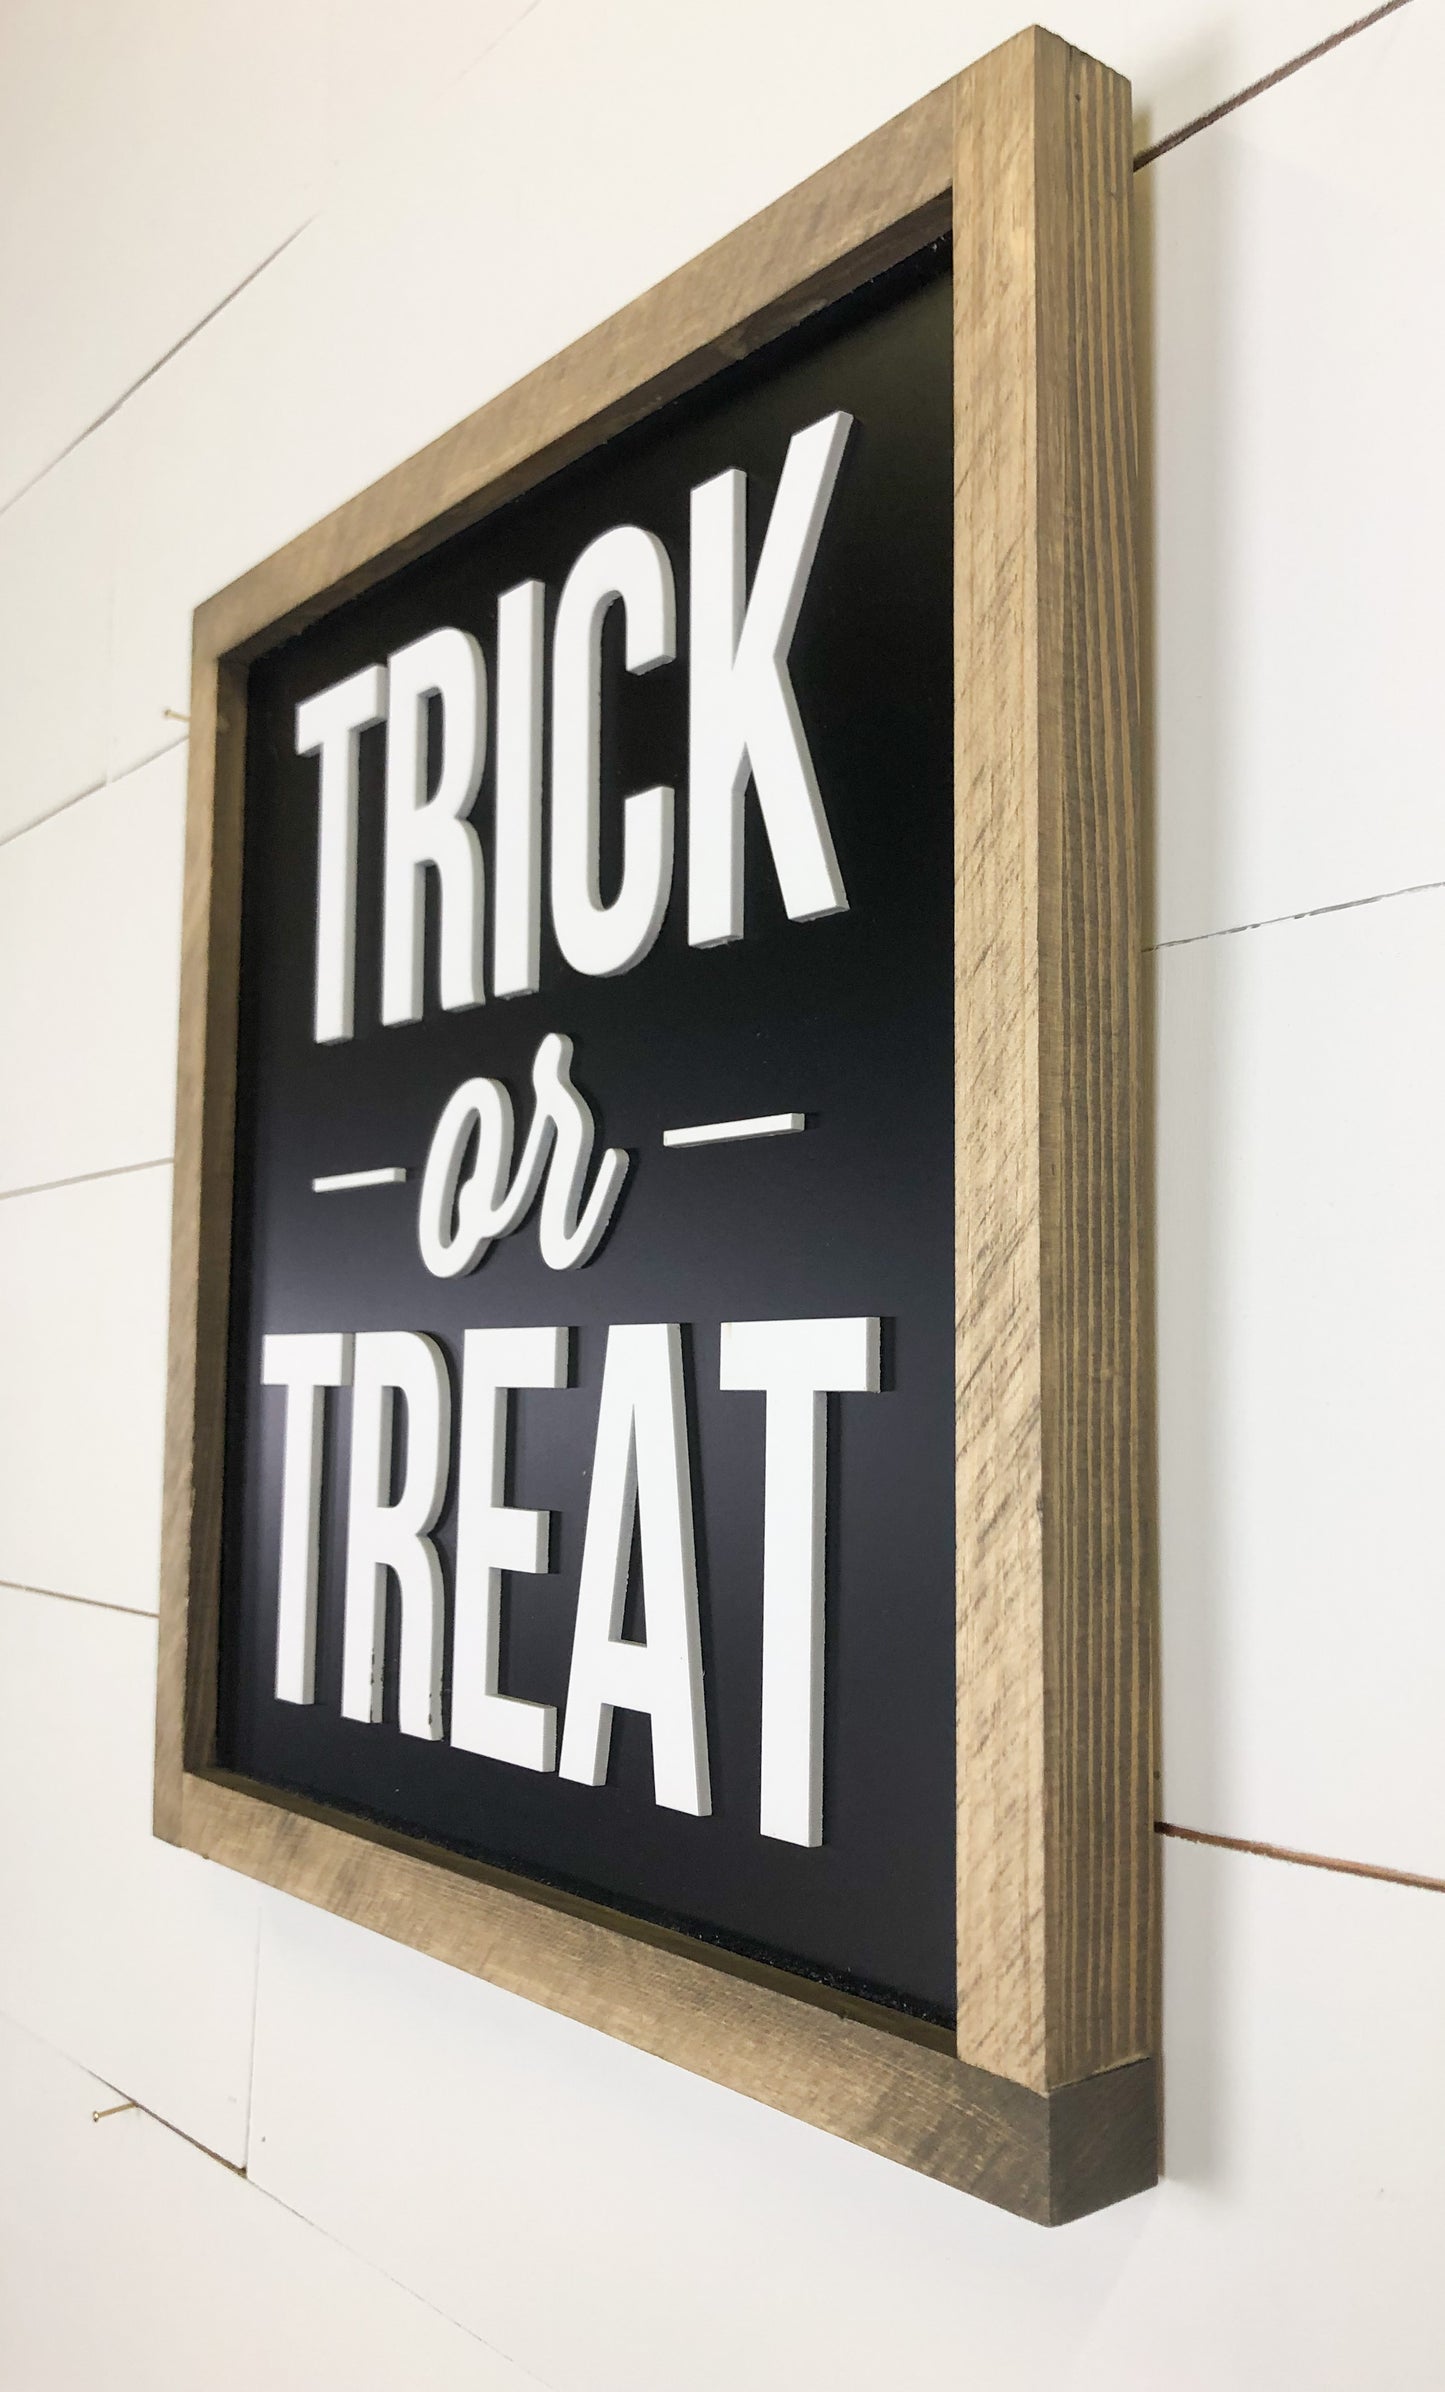 Trick or Treat | Halloween Sign | 14x14 in Wood Sign